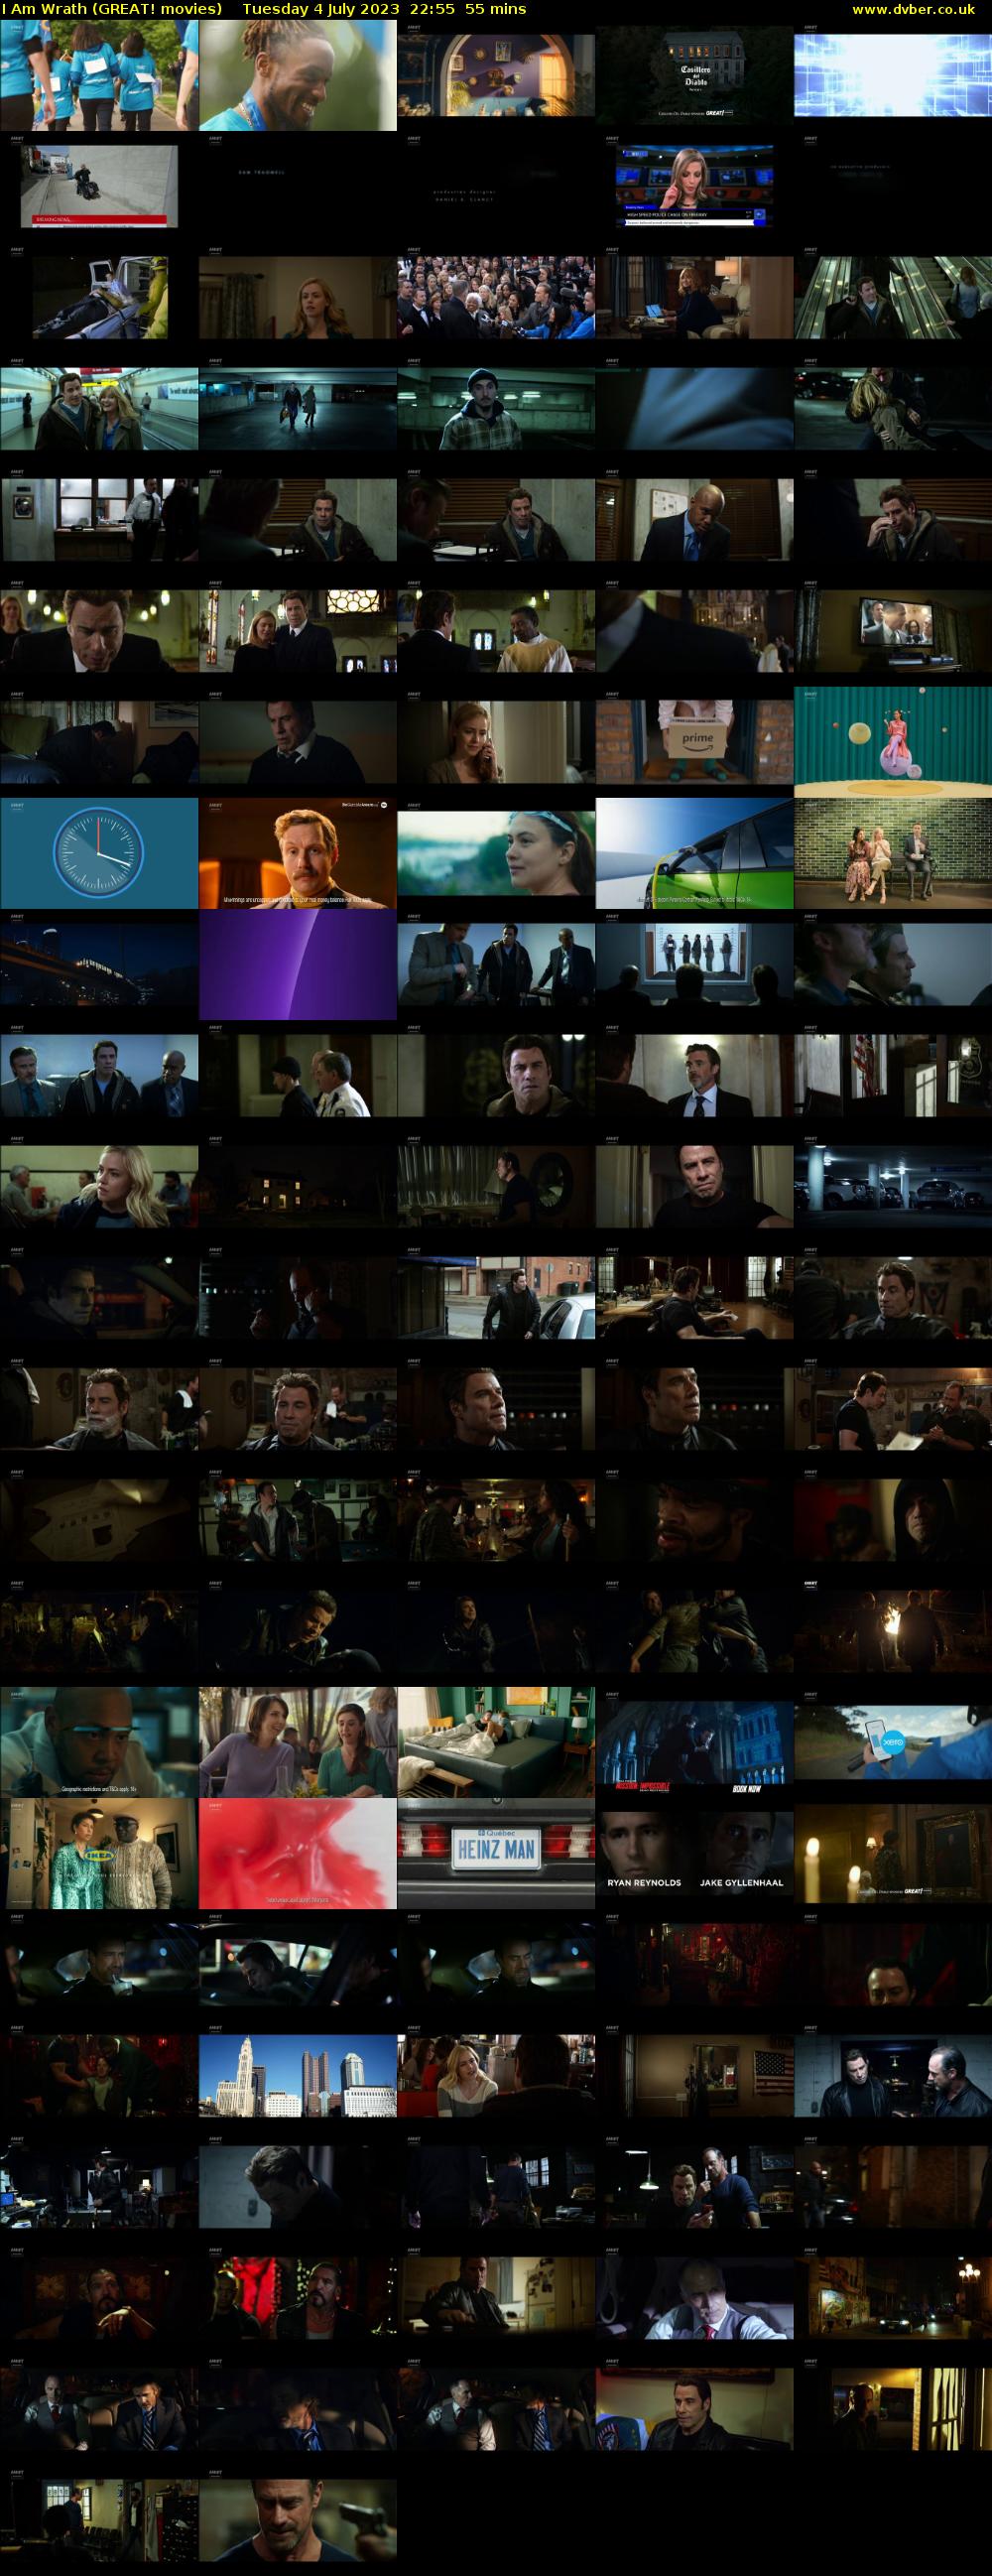 I Am Wrath (GREAT! movies) Tuesday 4 July 2023 22:55 - 23:50